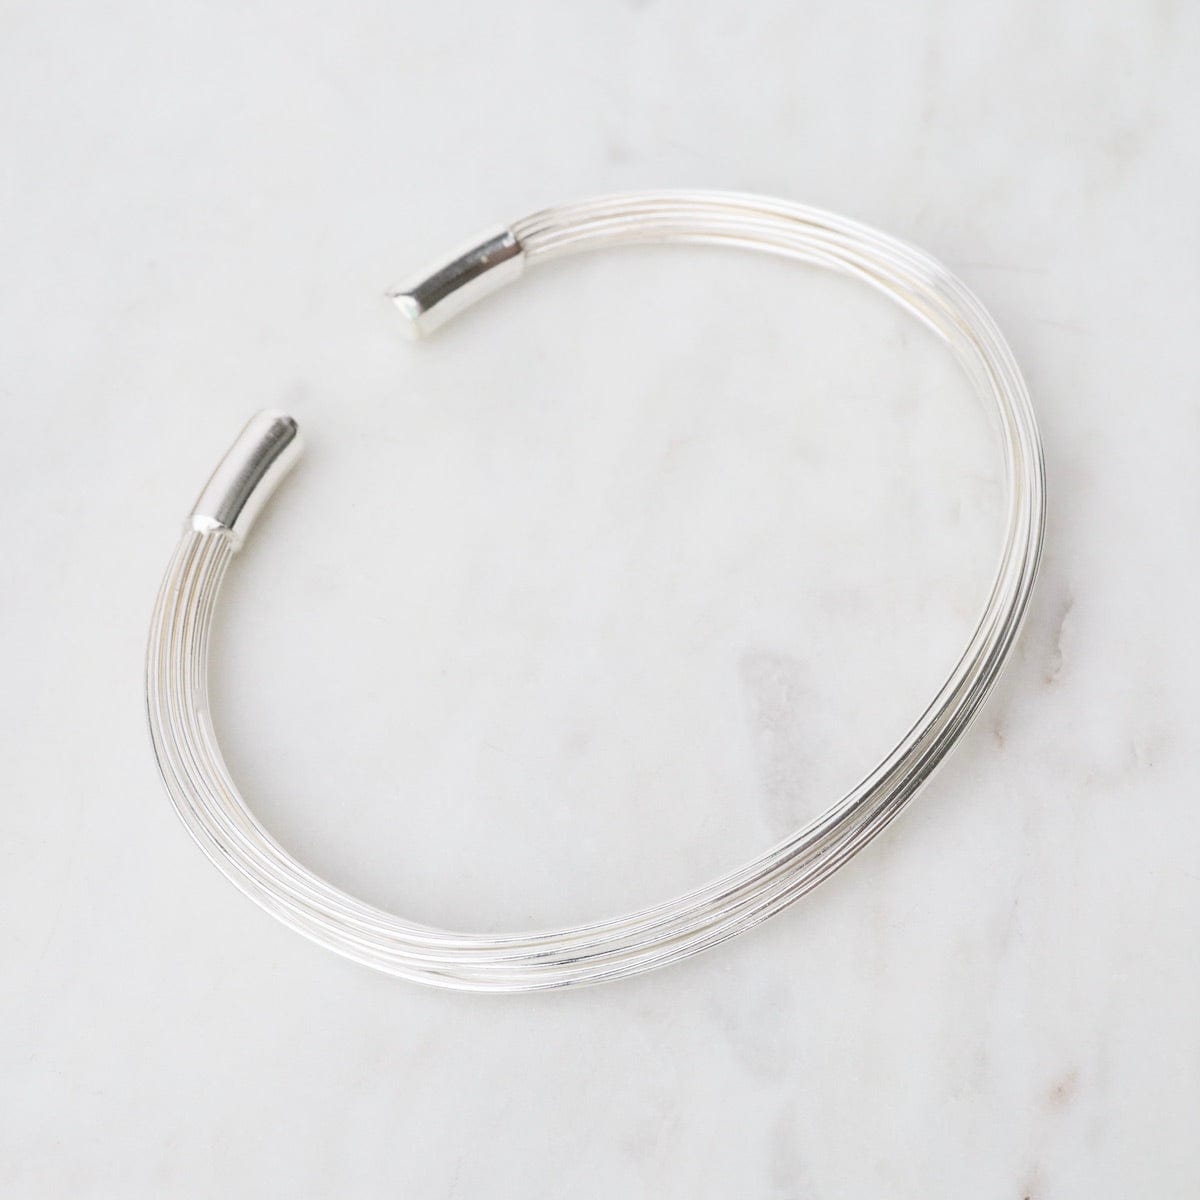 Load image into Gallery viewer, BRC Elephant Hair Inspired Cuff - Shiny Sterling Silver - 20 Strands
